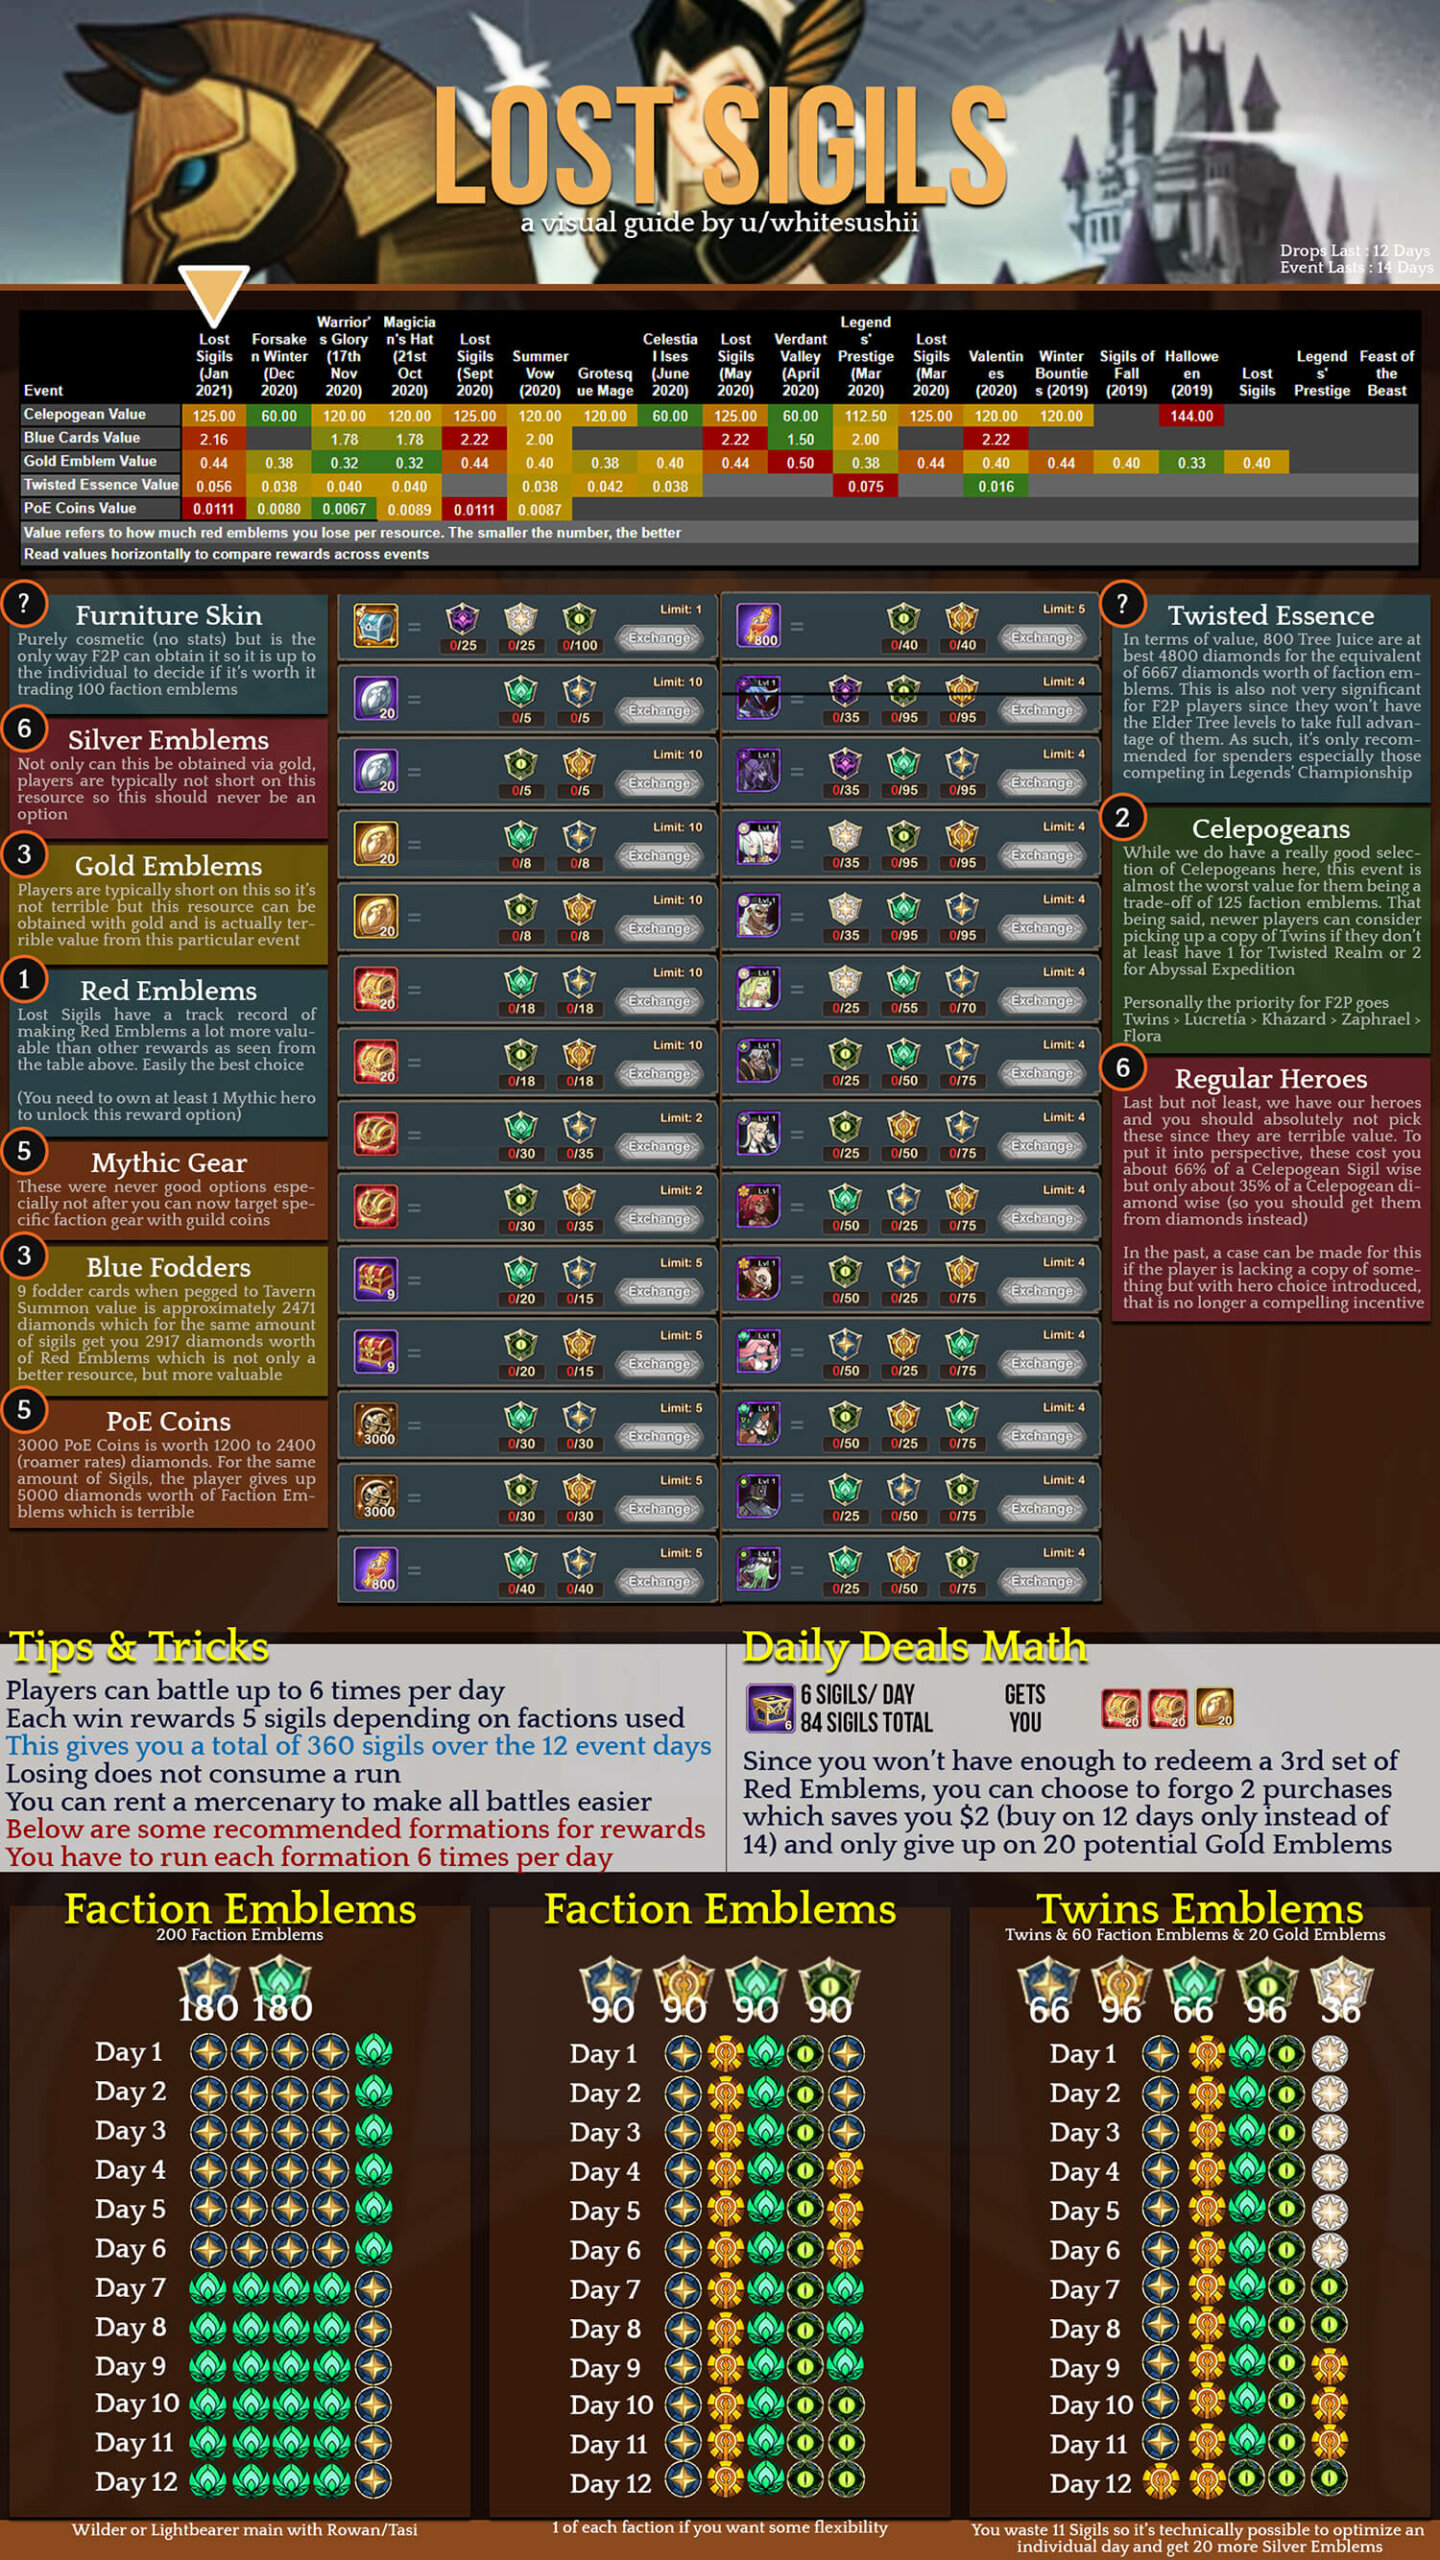 the lost sigils team infographic (1)